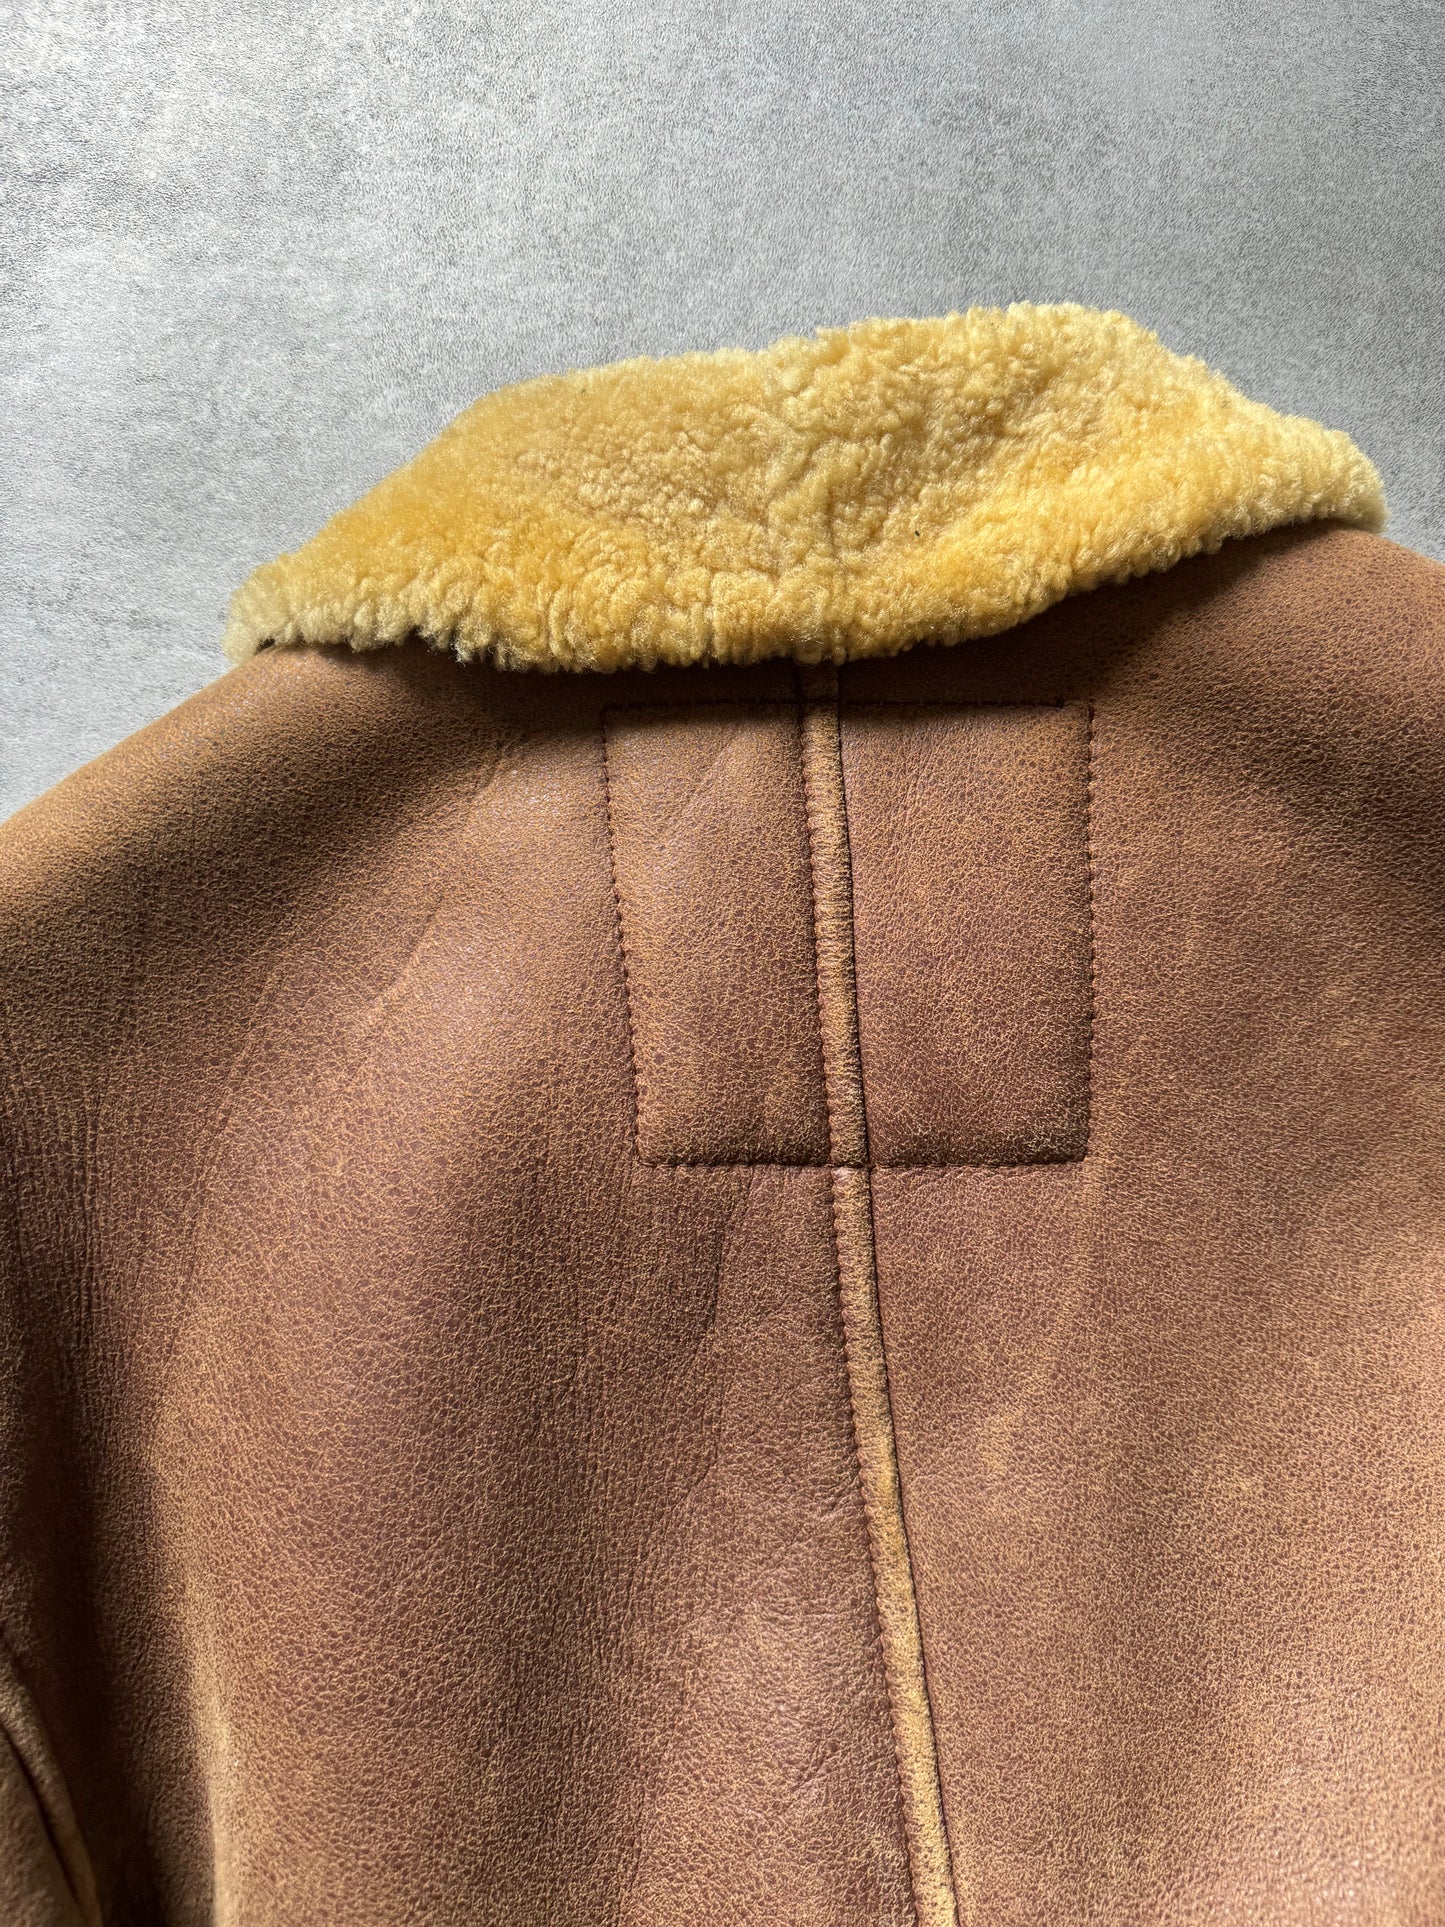 1980s Emporio Armani Brown Shearling Leather Jacket (L) - 3